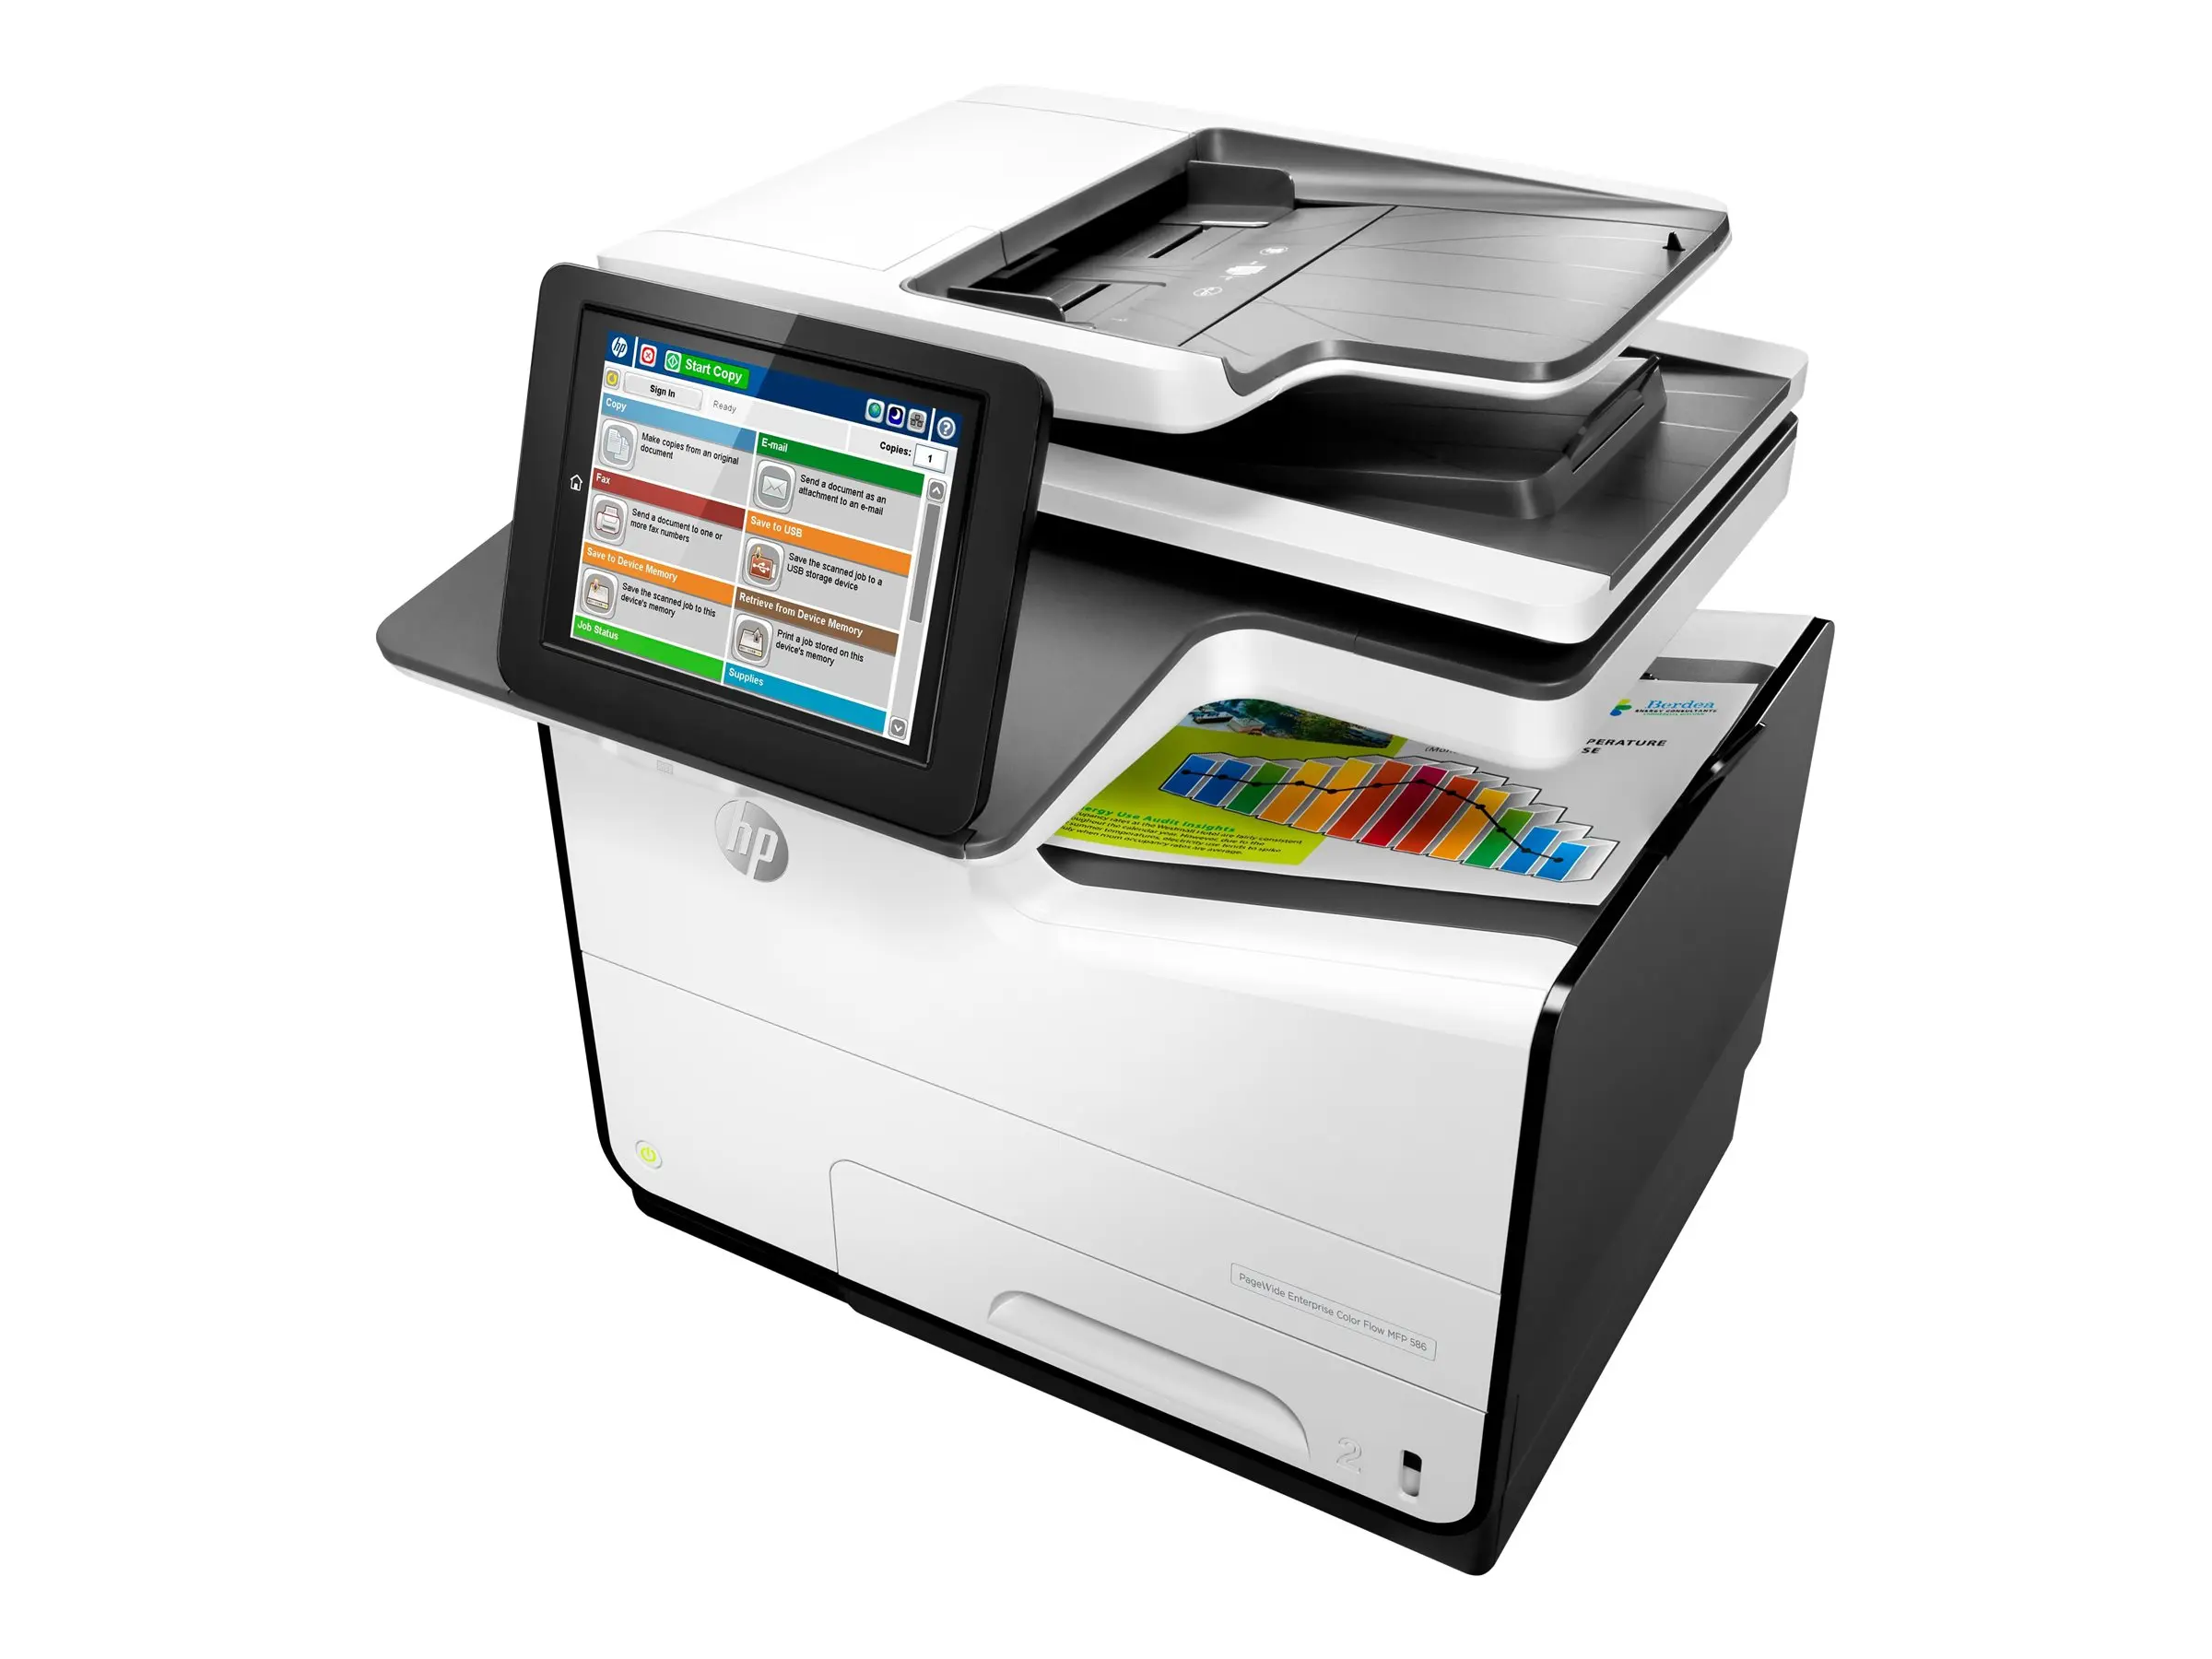 hewlett packard mfp 586 - How do I connect my PageWide Enterprise Color MFP 586